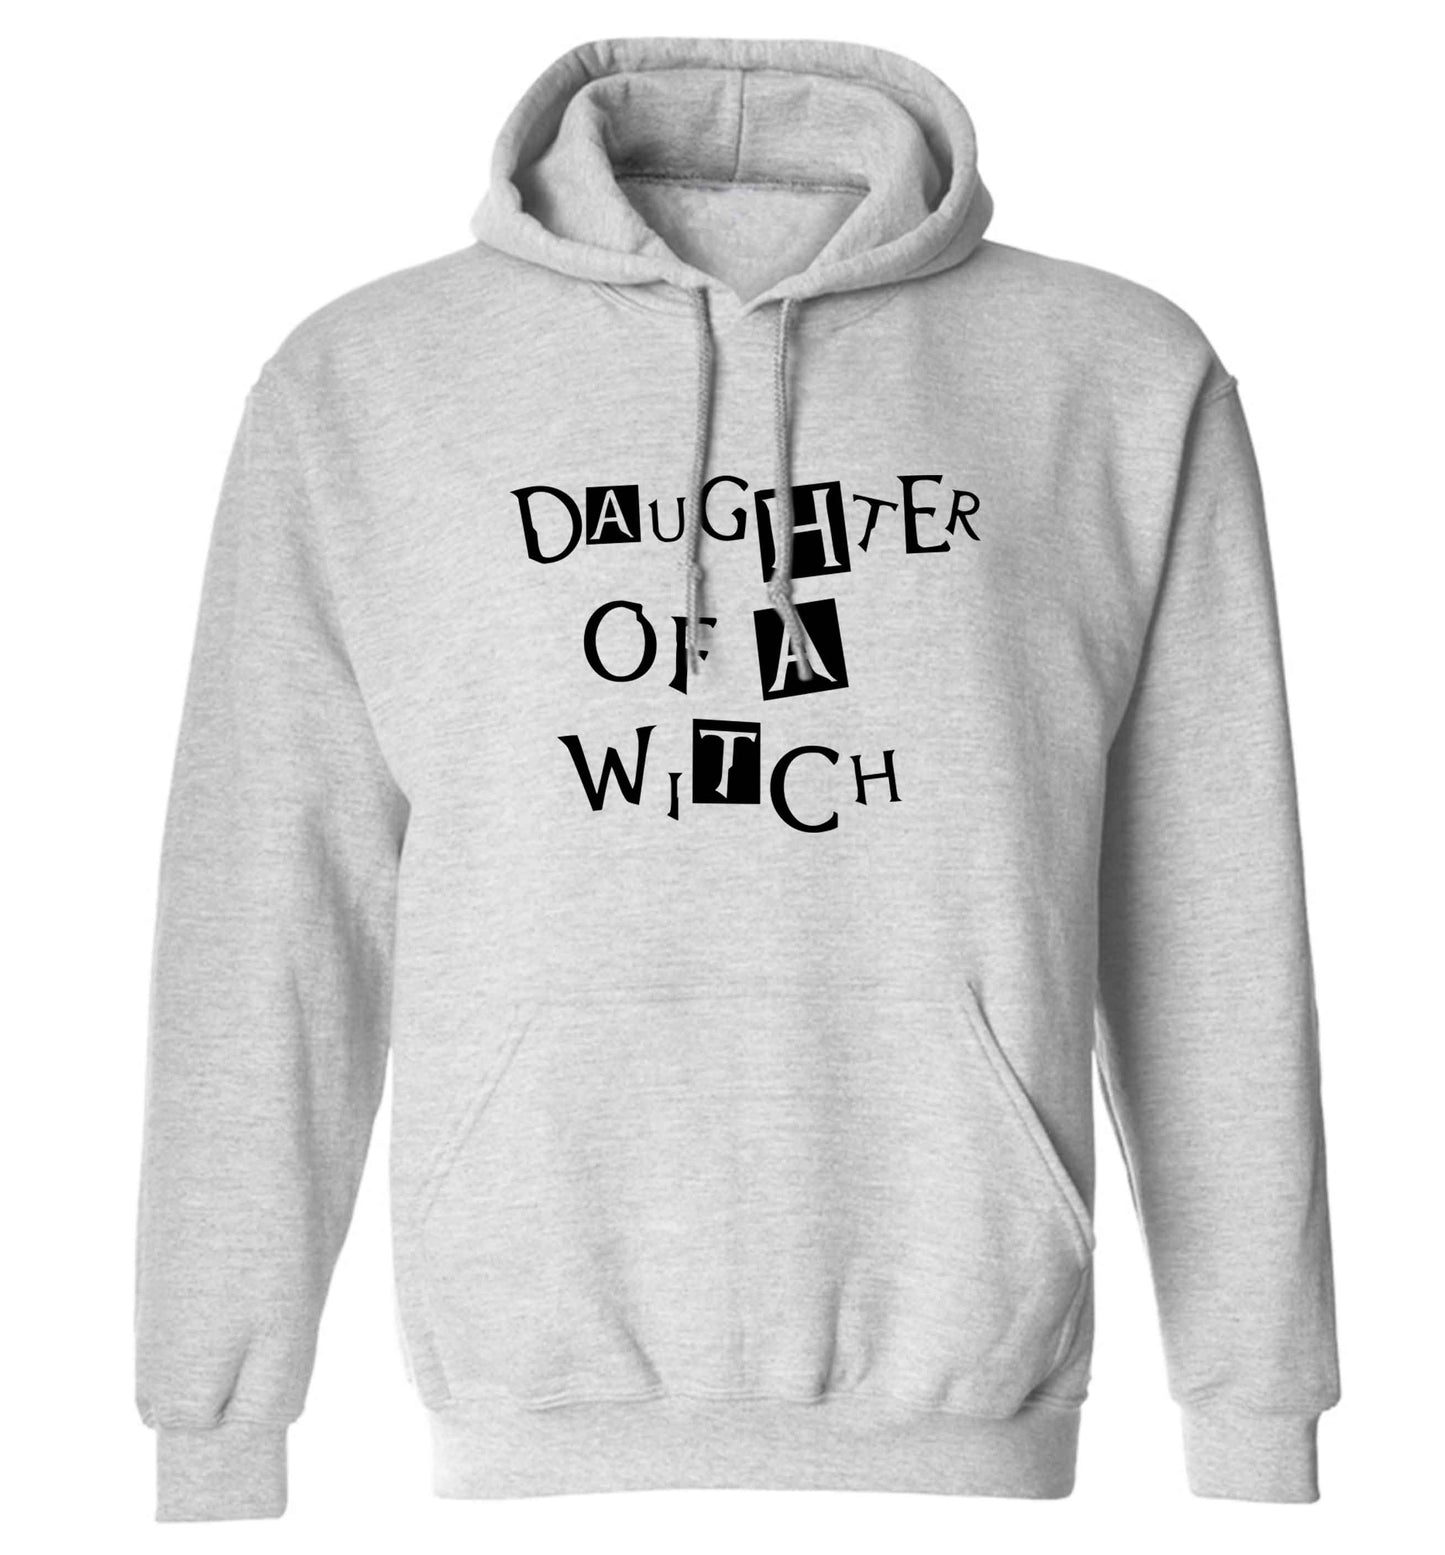 Daughter of a witch adults unisex grey hoodie 2XL